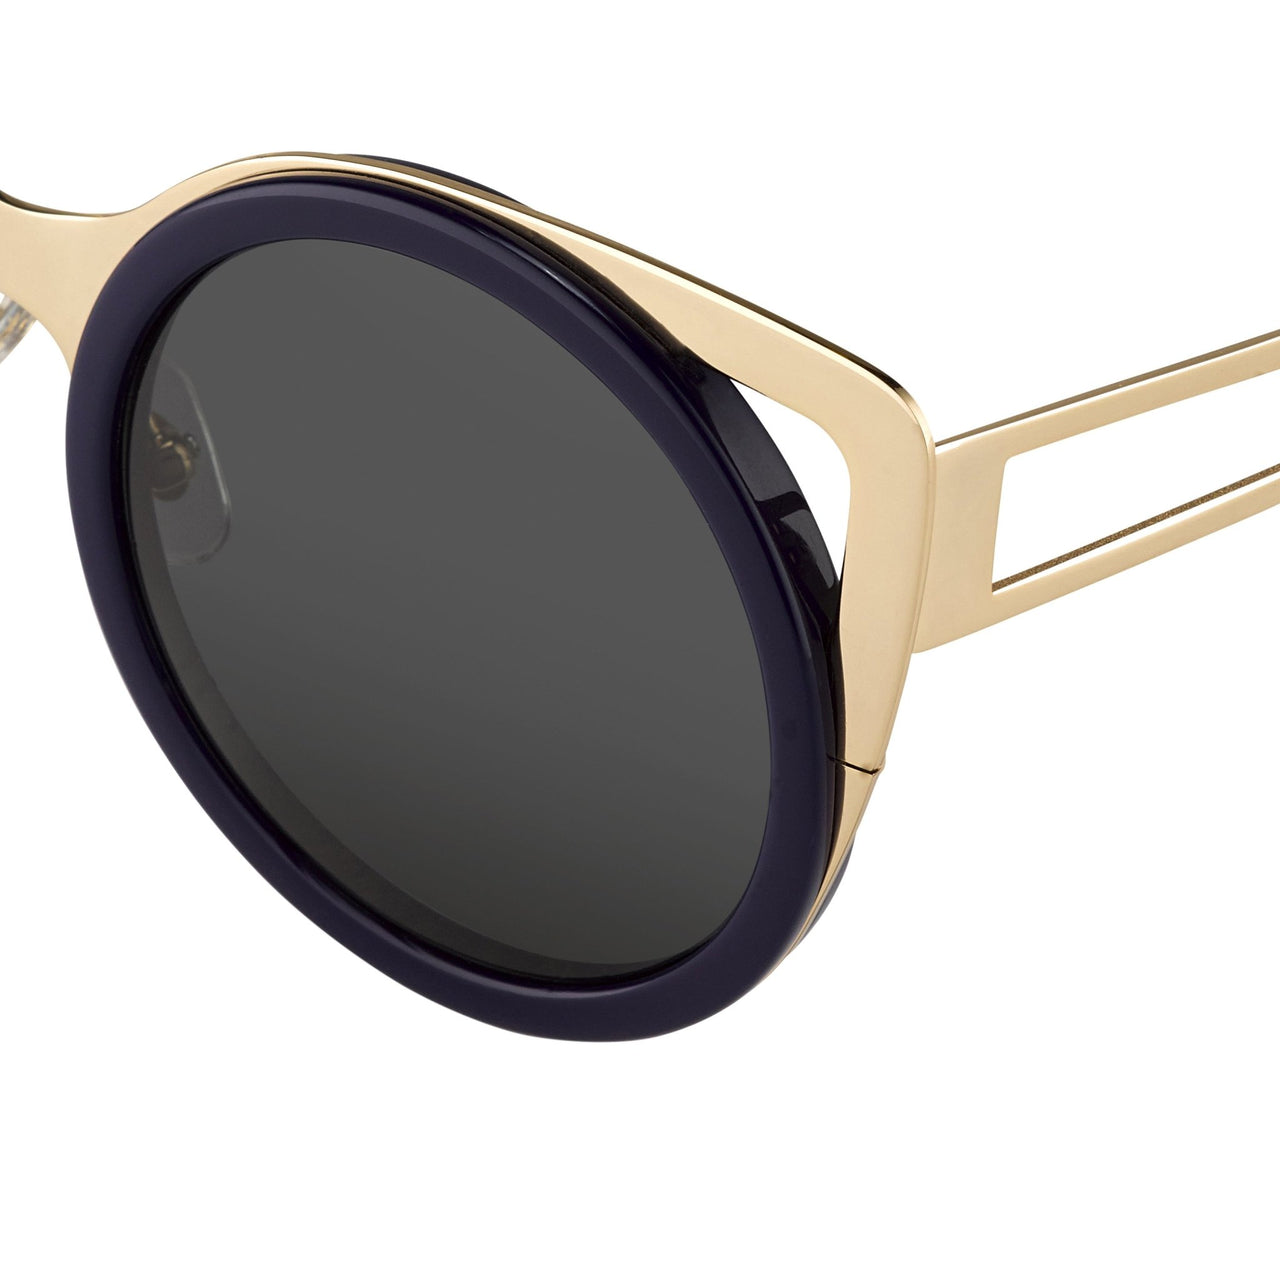 Erdem Women Sunglasses Cat Eye Navy Light Gold with Grey Graduated Lenses Category 3 EDM4C5SUN - Watches & Crystals